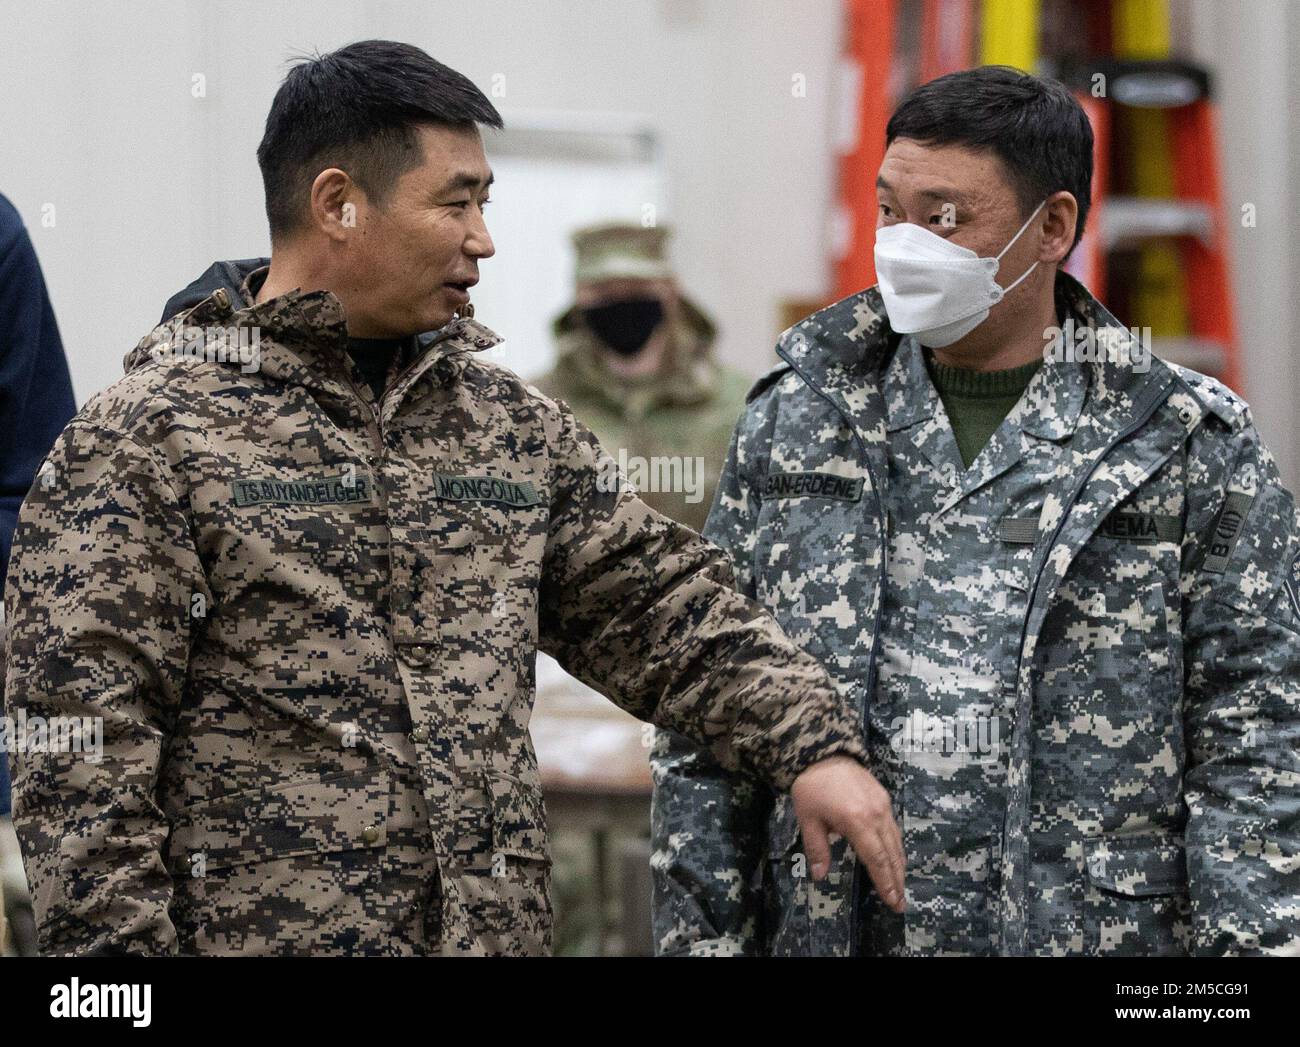 Mongolian Armed Forces Col. Buyandelger, a general staff member, and Cpt. Gan-Erdene of the Mongolian National Emergency Management Agency, observe training during Exercise Arctic Eagle-Patriot 22 at the Anchorage Fire Training Center in Anchorage, Alaska, March 1, 2022. Joint Exercise Arctic Eagle-Patriot 22 increases the National Guard’s capacity to operate in austere, extreme cold-weather environments across Alaska and the Arctic region. AEP22 enhances the ability of military and civilian inter-agency partners to respond to a variety of emergency and homeland security missions across Alaska Stock Photo